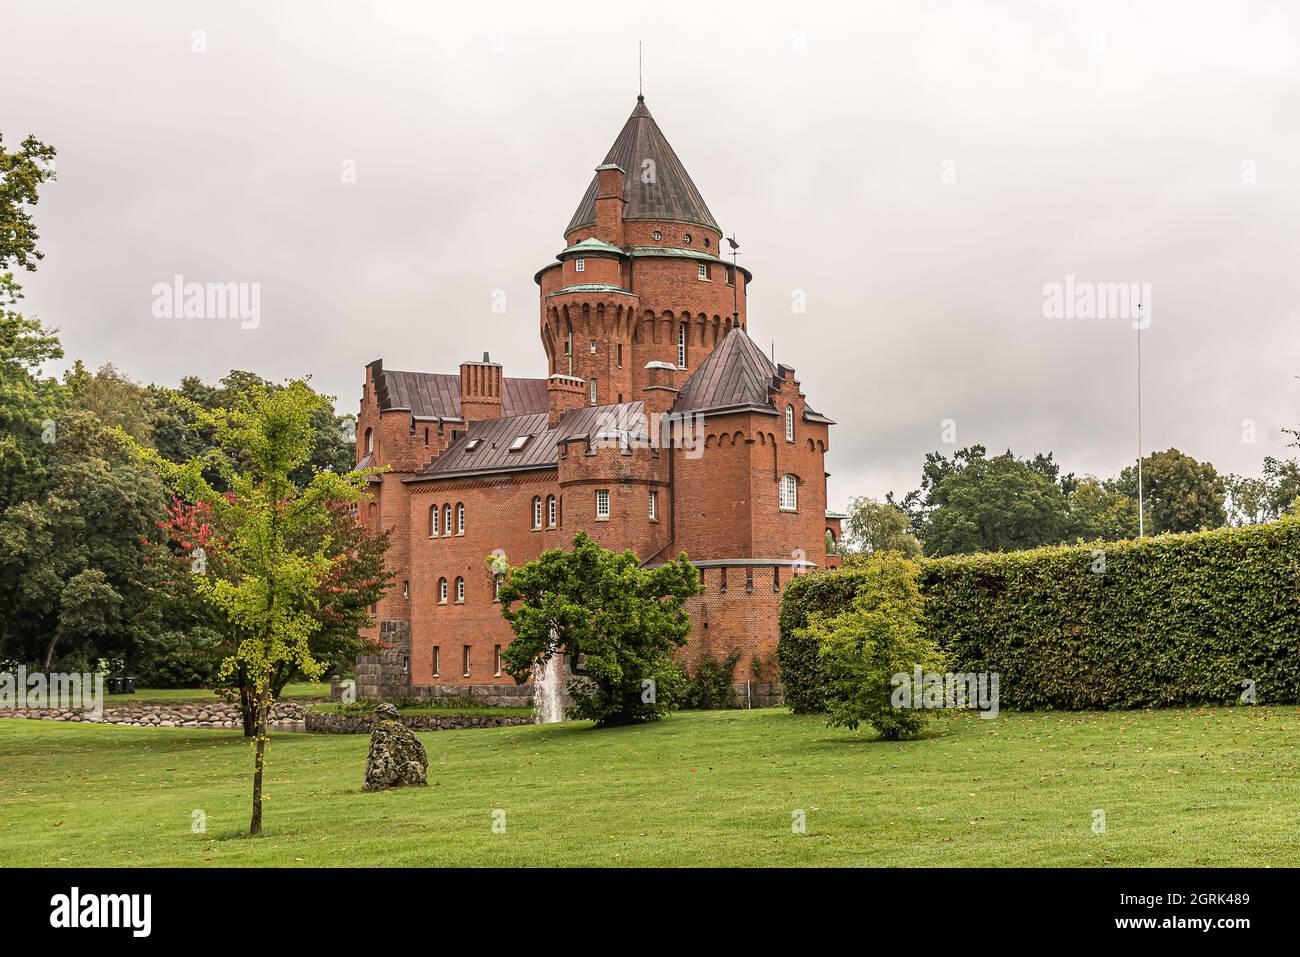 the romantic Hjularod fairy tale castle in a green lawn with a tall tower, Eslov, Sweden, September 16, 2021 Stock Photo